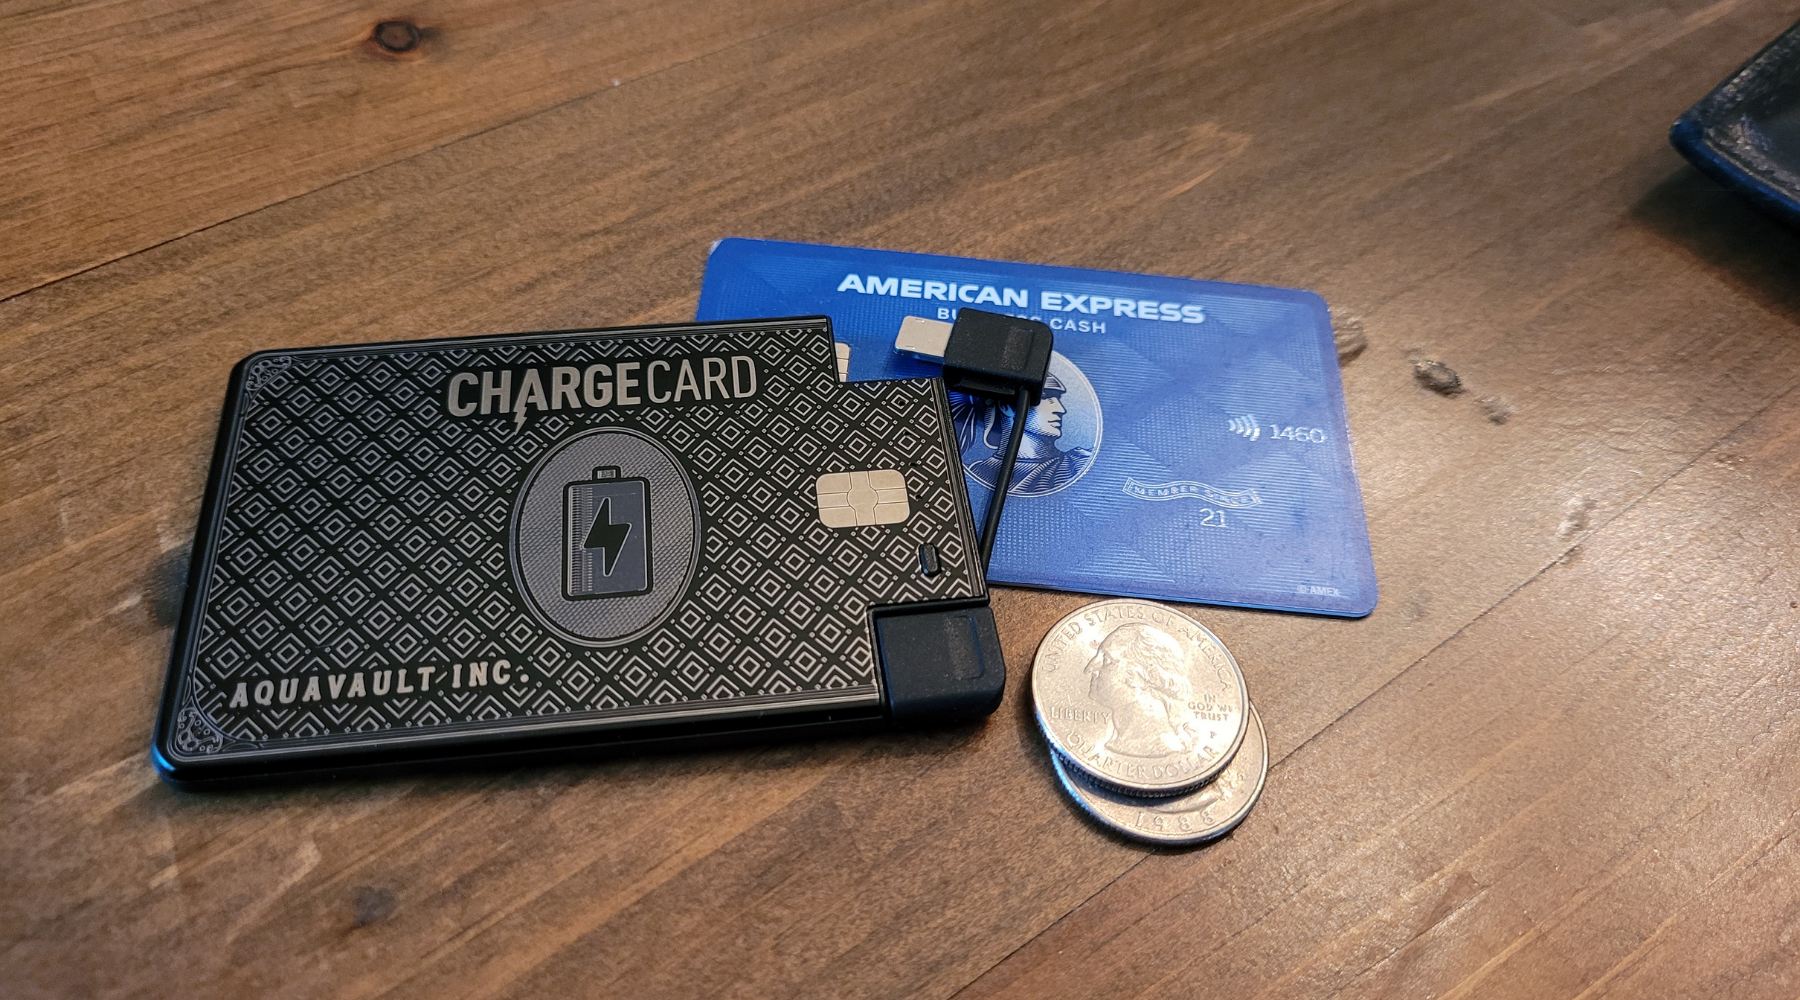 From Digital Journal: AquaVault ChargeCard(R) Revolutionizes Portable Chargers for People on the Go